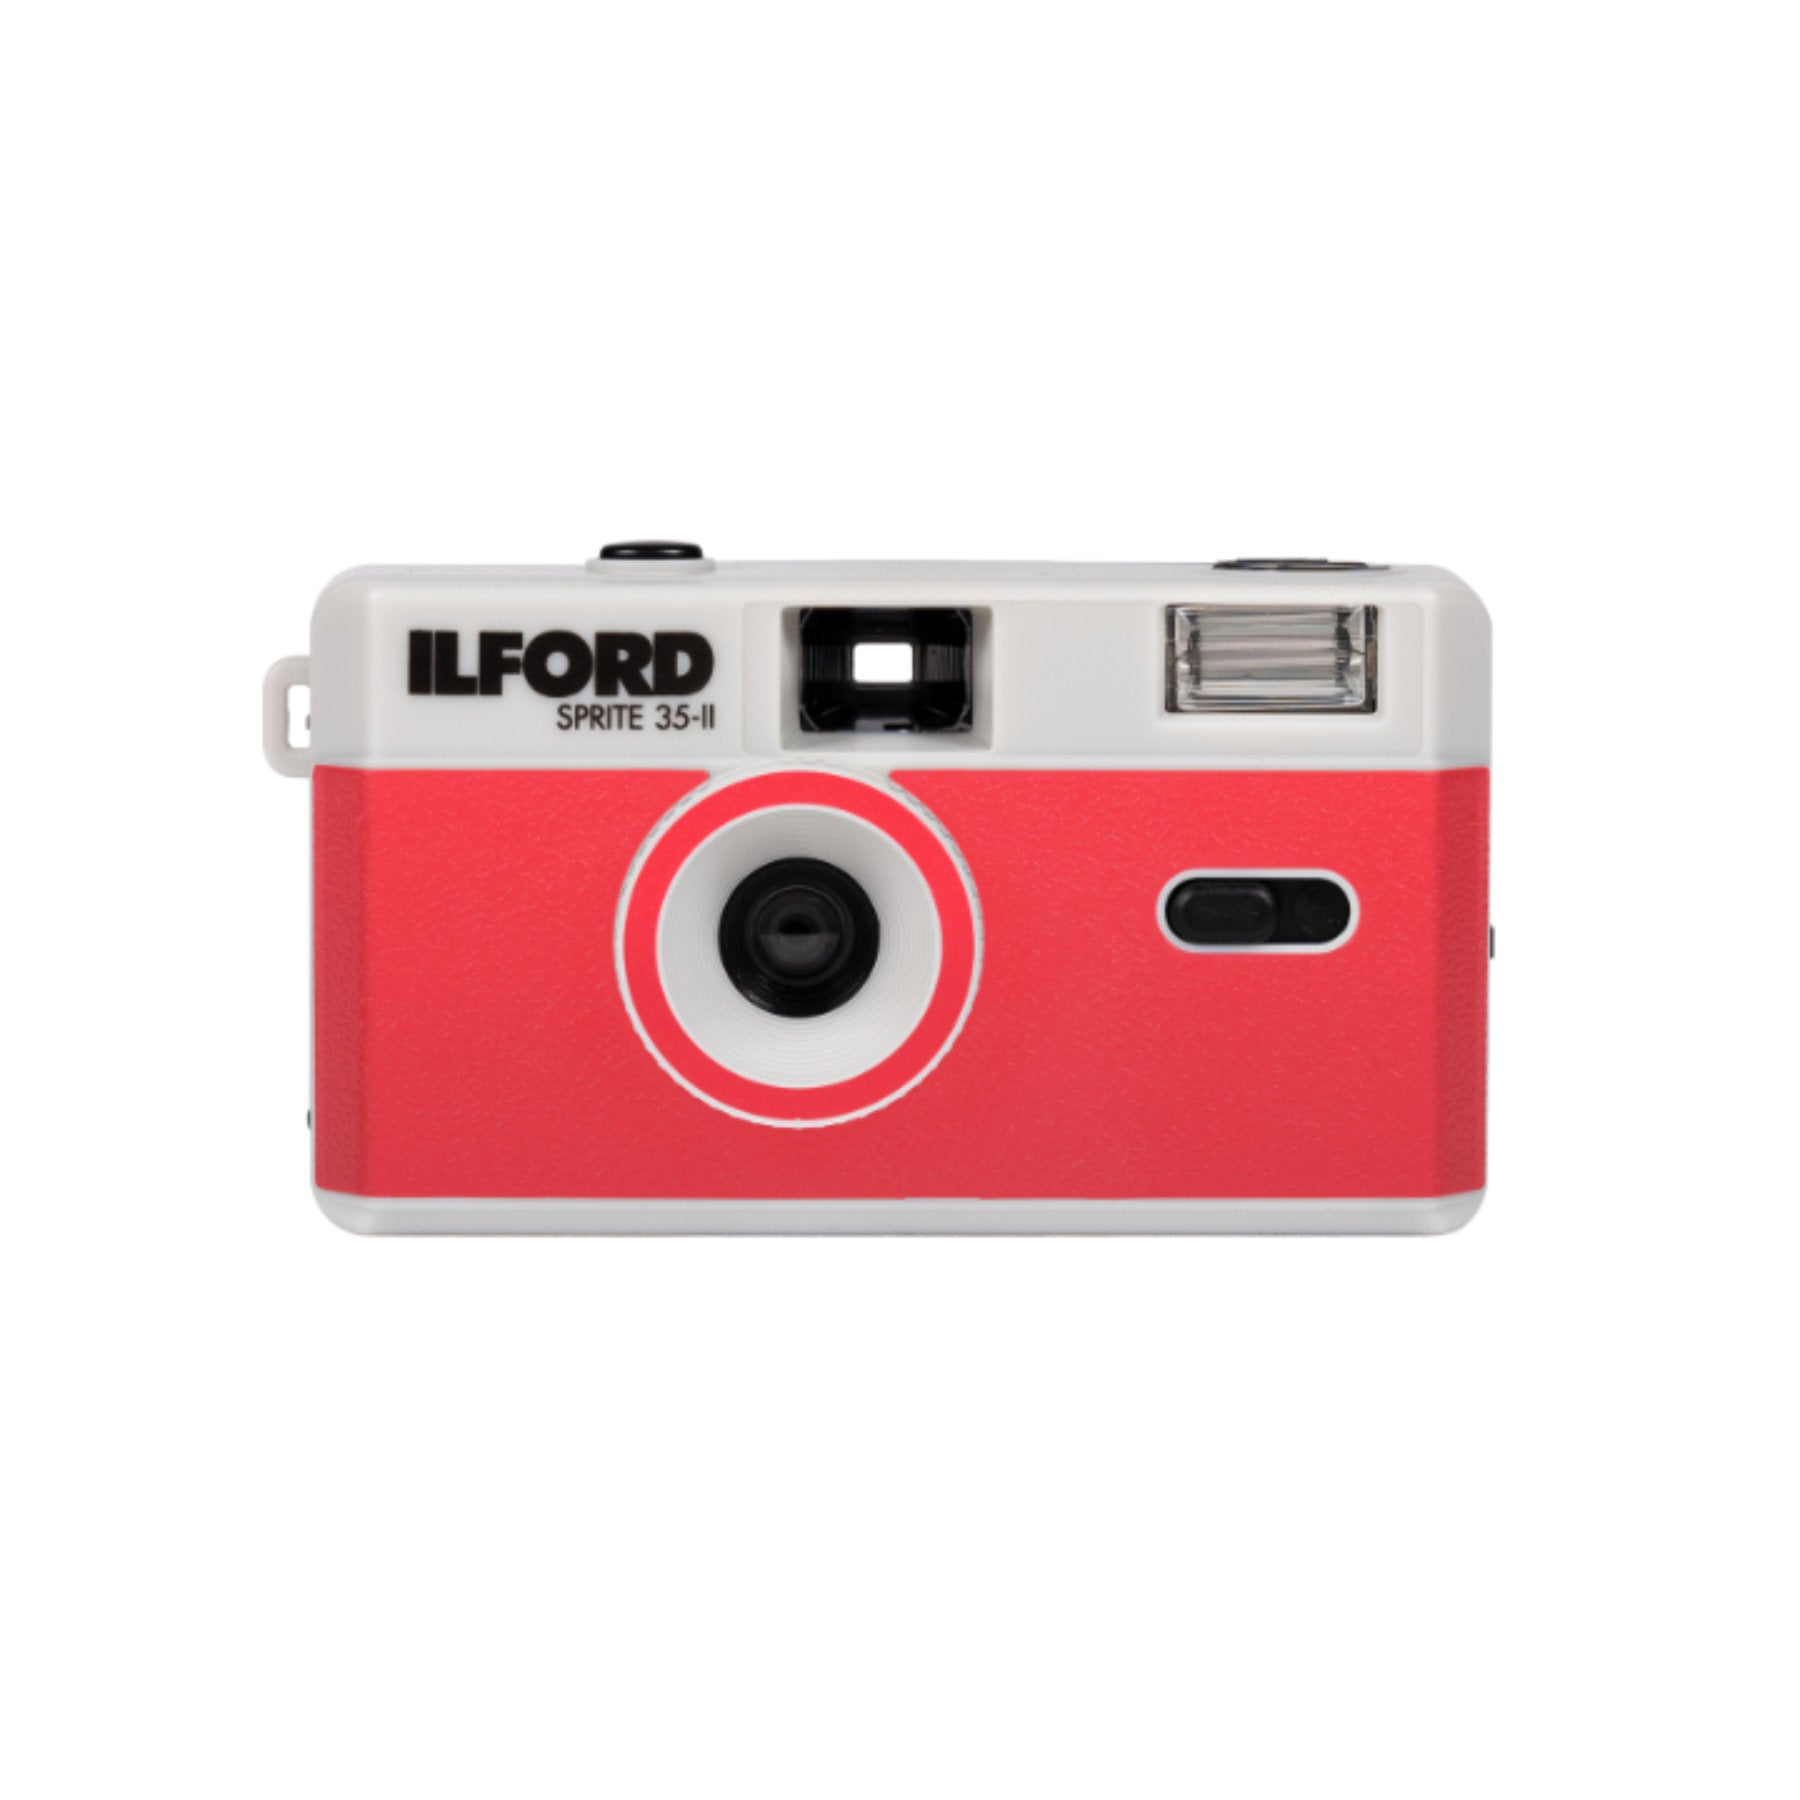 Buy ILFORD SPRITE 35-II reusable film camera - silver & red at Topic Store